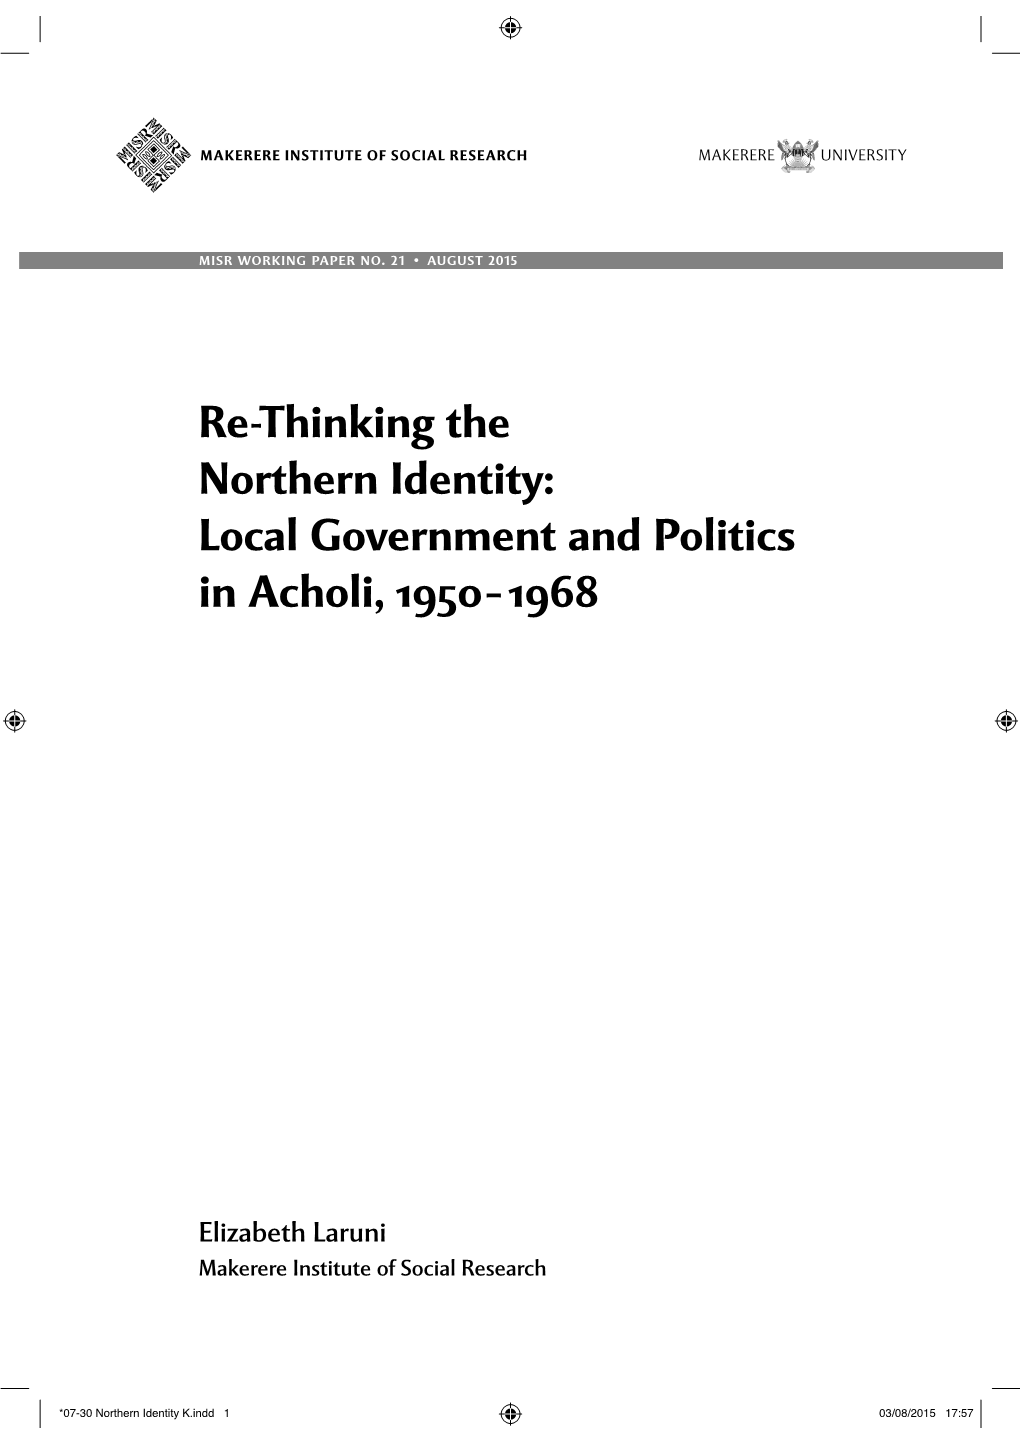 Re-Thinking the Northern Identity: Local Government and Politics in Acholi, 1950 – 1968